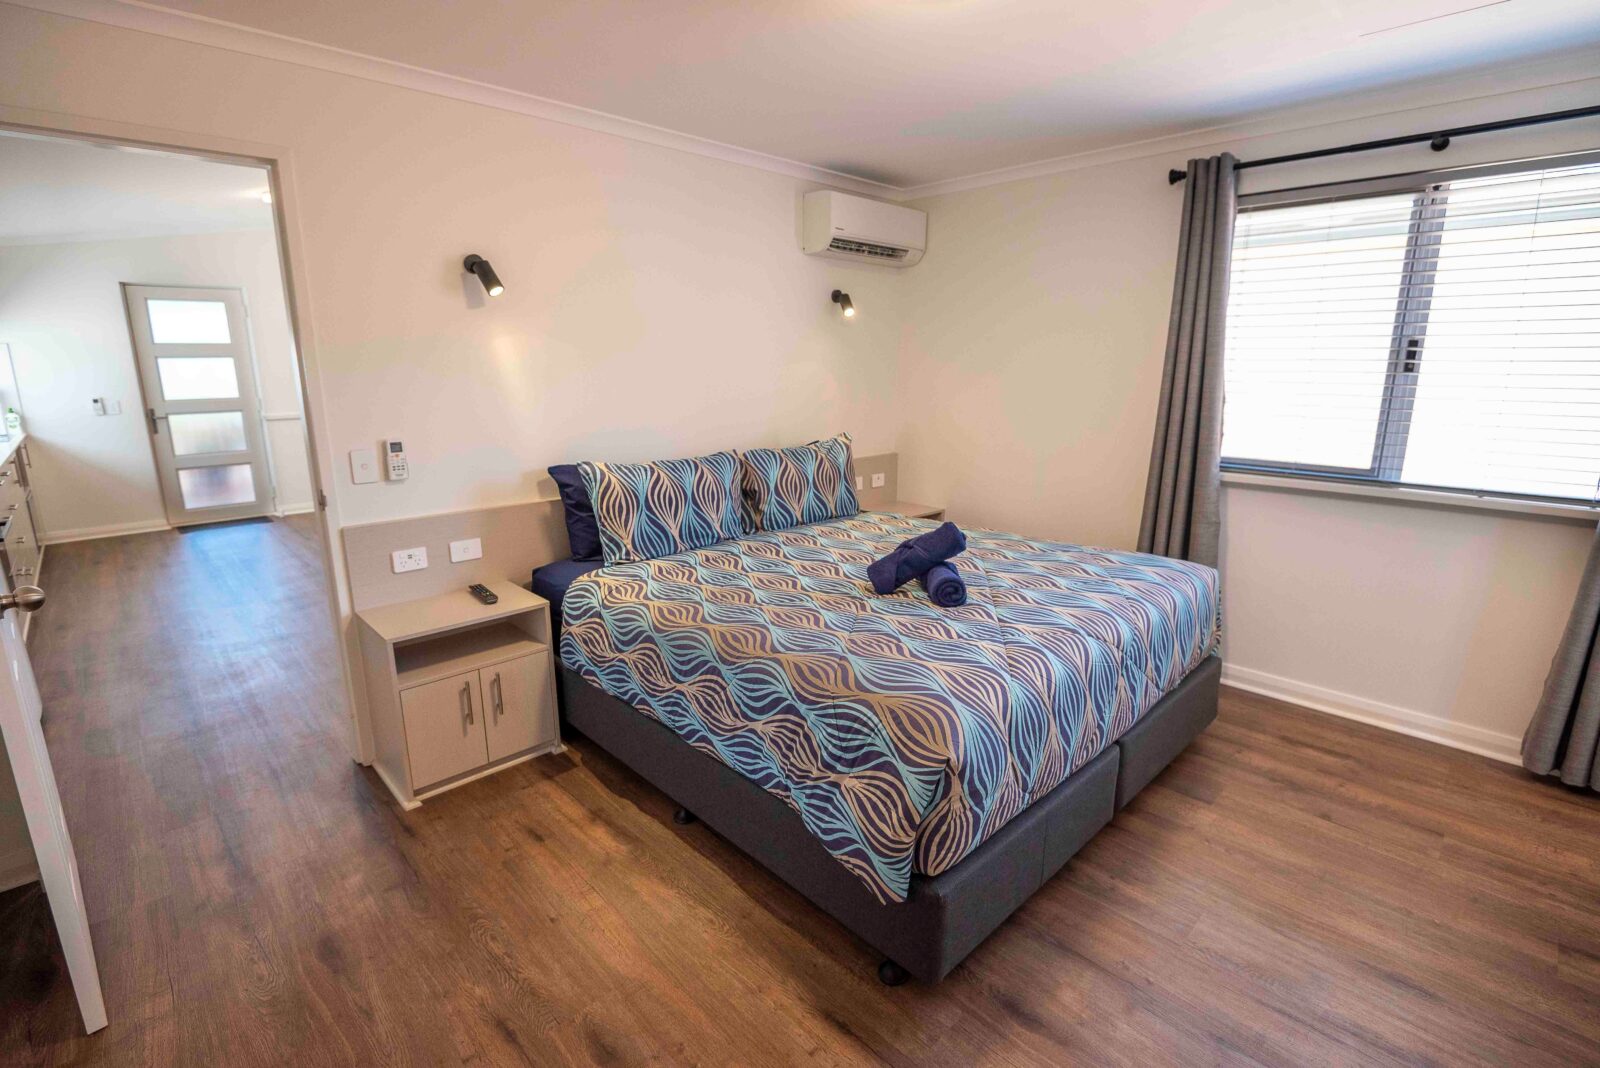 A large master bedroom features a king bed, air conditioning and night stands with USB charging port